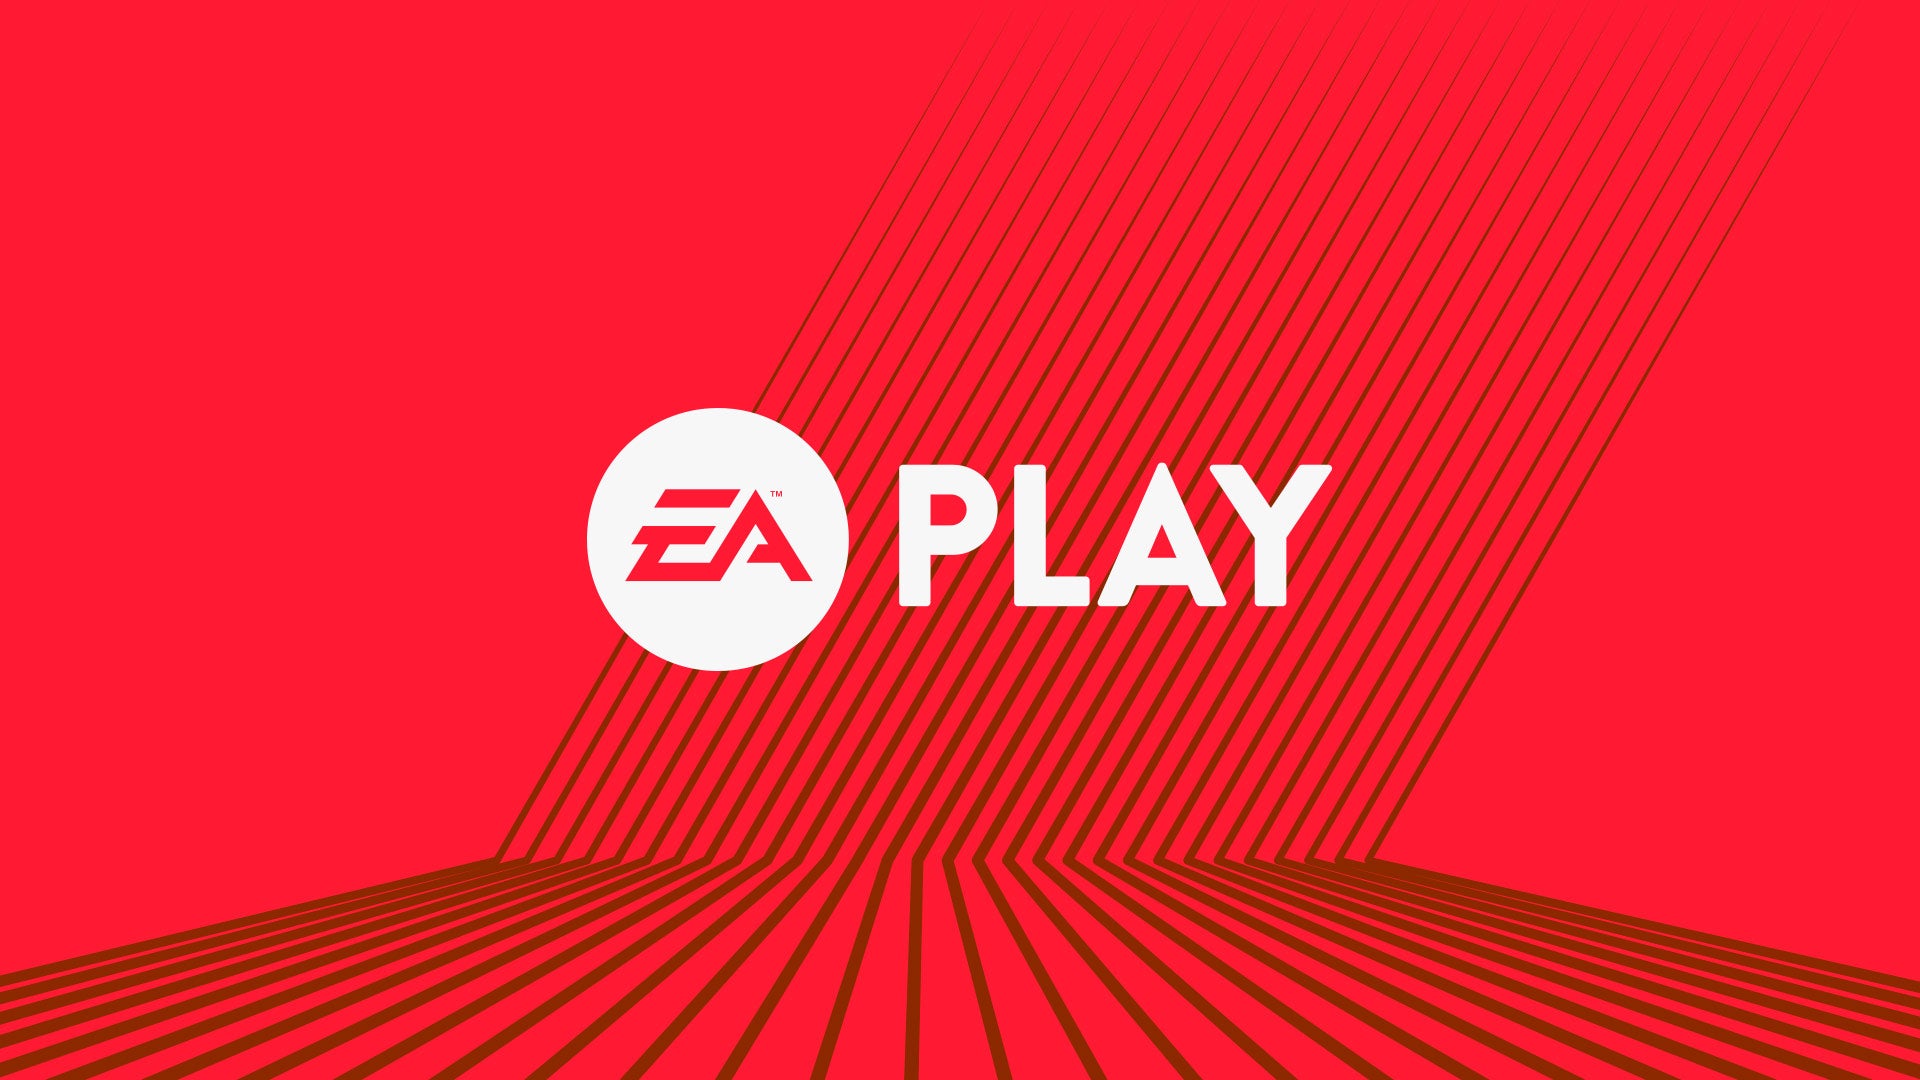 Image for EA Play Live 2020 kicks off tonight - watch it here